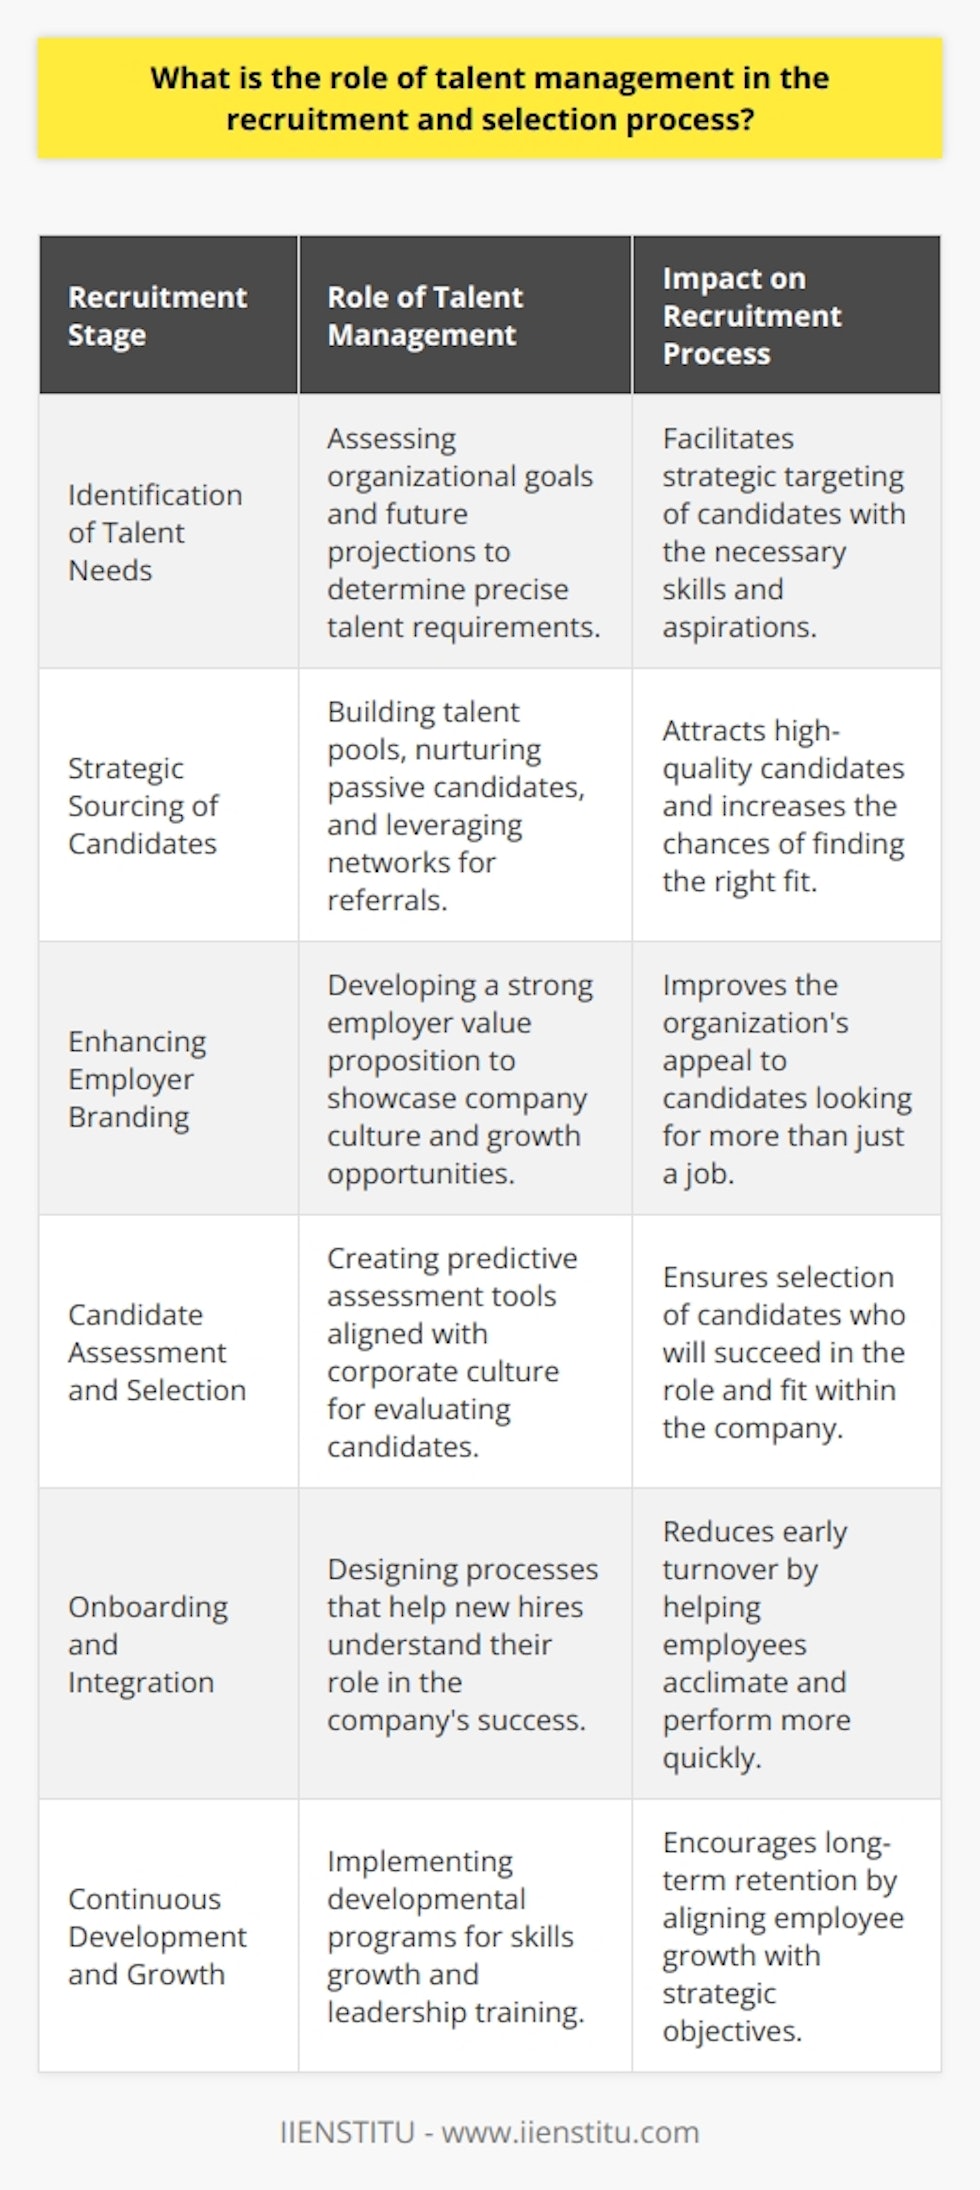 Talent management is a strategic approach that enhances the recruitment and selection process by aligning the workforce's talents and potential with the organization's goals and needs. Its role is multifaceted, encompassing several stages of the employee lifecycle.**Identification of Talent Needs**The foundation of talent management within recruitment begins with a precise identification of the company's current and future talent needs. This requires a deep understanding of the organizational strategy and the specific competencies and roles that are critical for success. Identifying these needs ensures that the recruitment process is strategic rather than ad hoc, targeting individuals whose skills and career aspirations align with the company's objectives.**Strategic Sourcing of Candidates**Once the talent needs are identified, talent management influences the sourcing of potential candidates. This involves not only advertising vacancies but also building talent pools and nurturing relationships with passive candidates – those not actively seeking new opportunities but who possess the desired skills and attributes. It also involves leveraging employee networks and referrals, which often lead to high-quality hires because current employees understand the company culture and requirements.**Enhancing Employer Branding**Talent management shapes the employer brand, which is the market's perception of the company as an employer. A strong employer brand attracts talent by showcasing the company's values, culture, and opportunities for personal and professional growth. Recruiters can leverage this brand to appeal to high-caliber candidates who seek more than just a job but a place where they can thrive and align with their aspirations and values.**Candidate Assessment and Selection**In the selection phase, talent management informs the development of assessment methods that are predictive of success in the role and aligned with the company’s culture. This might include behavioral and situational interviews, assessment centers, and job simulations. These methods help in selecting individuals who are not only technically capable but also a good cultural fit, which is critical for long-term retention and engagement.**Onboarding and Integration**The role of talent management extends beyond the point of hire. Effective onboarding processes that help new hires integrate into the company culture and understand their role in achieving business objectives are essential. Talent management ensures that new employees feel welcomed and equipped to perform, thereby reducing turnover rates in the initial months of employment.**Continuous Development and Growth**It's essential to recognize that the recruitment and selection process is just the beginning of talent management. Comprehensive development programs that grow employees’ skills and prepare them for future challenges are integral to retaining talent. This includes personalized career progression plans, ongoing training, and leadership development designed to align employees' growth with the company’s strategic needs.**Conclusion**The importance of talent management in the recruitment and selection process cannot be overstated. It not only refines the way organizations attract and select candidates but also ensures that these individuals are well-positioned for success and growth within the company. From precise talent needs identification to strategic candidate sourcing, employer branding, rigorous selection processes, effective onboarding, and ongoing development, talent management touches every aspect of recruitment and has a profound impact on the organization's ability to achieve its goals and maintain a competitive edge in the marketplace.